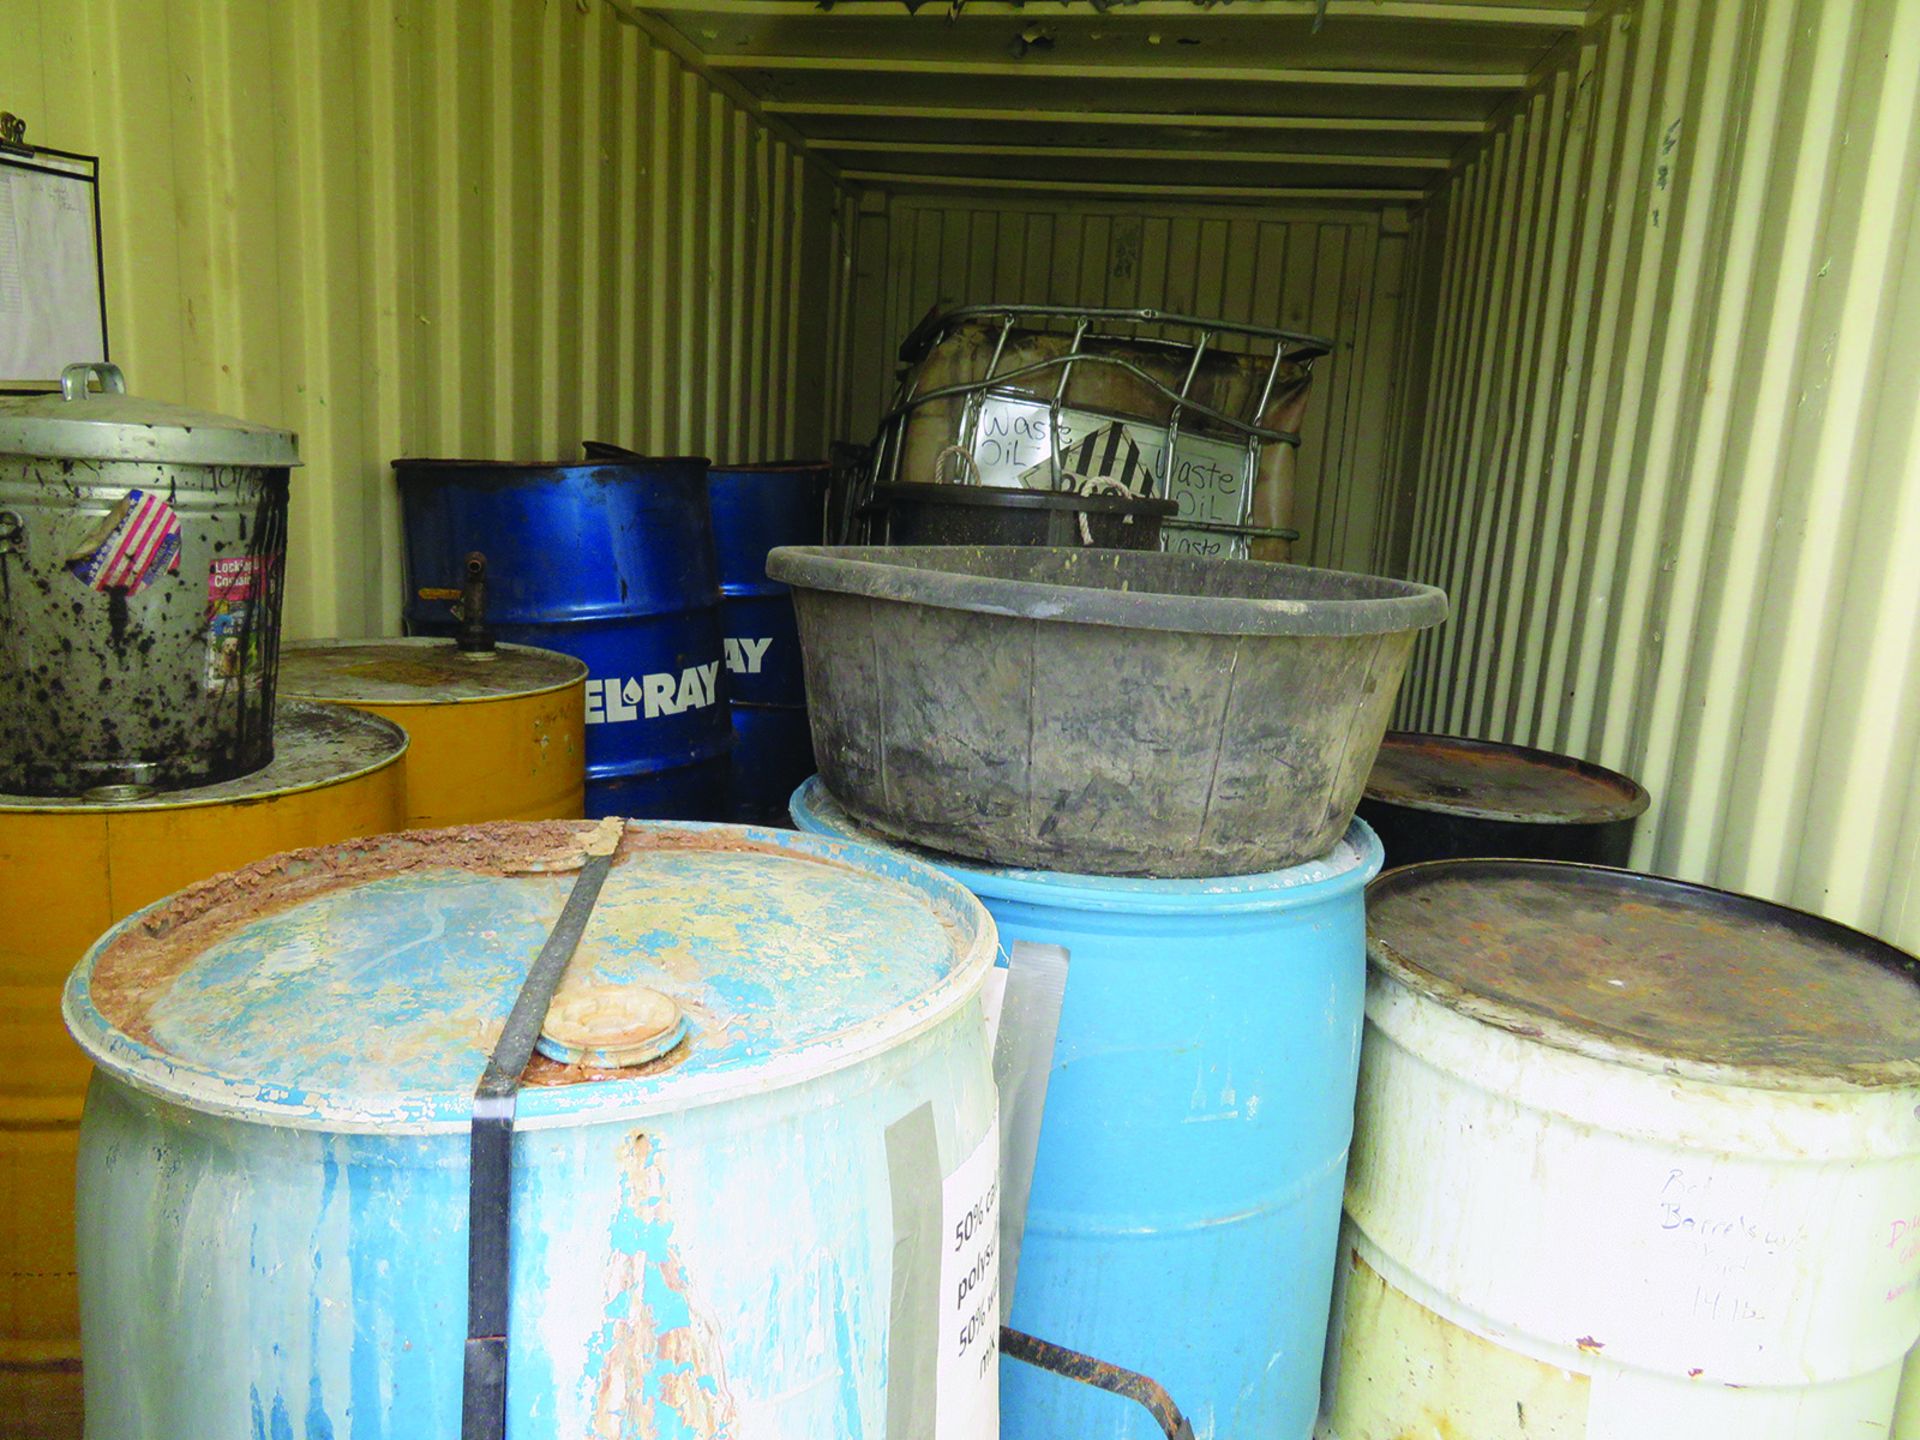 LOT: CONTENTS OF STORAGE CONTAINER INCLUDING ASSORTED OIL & FLUIDS